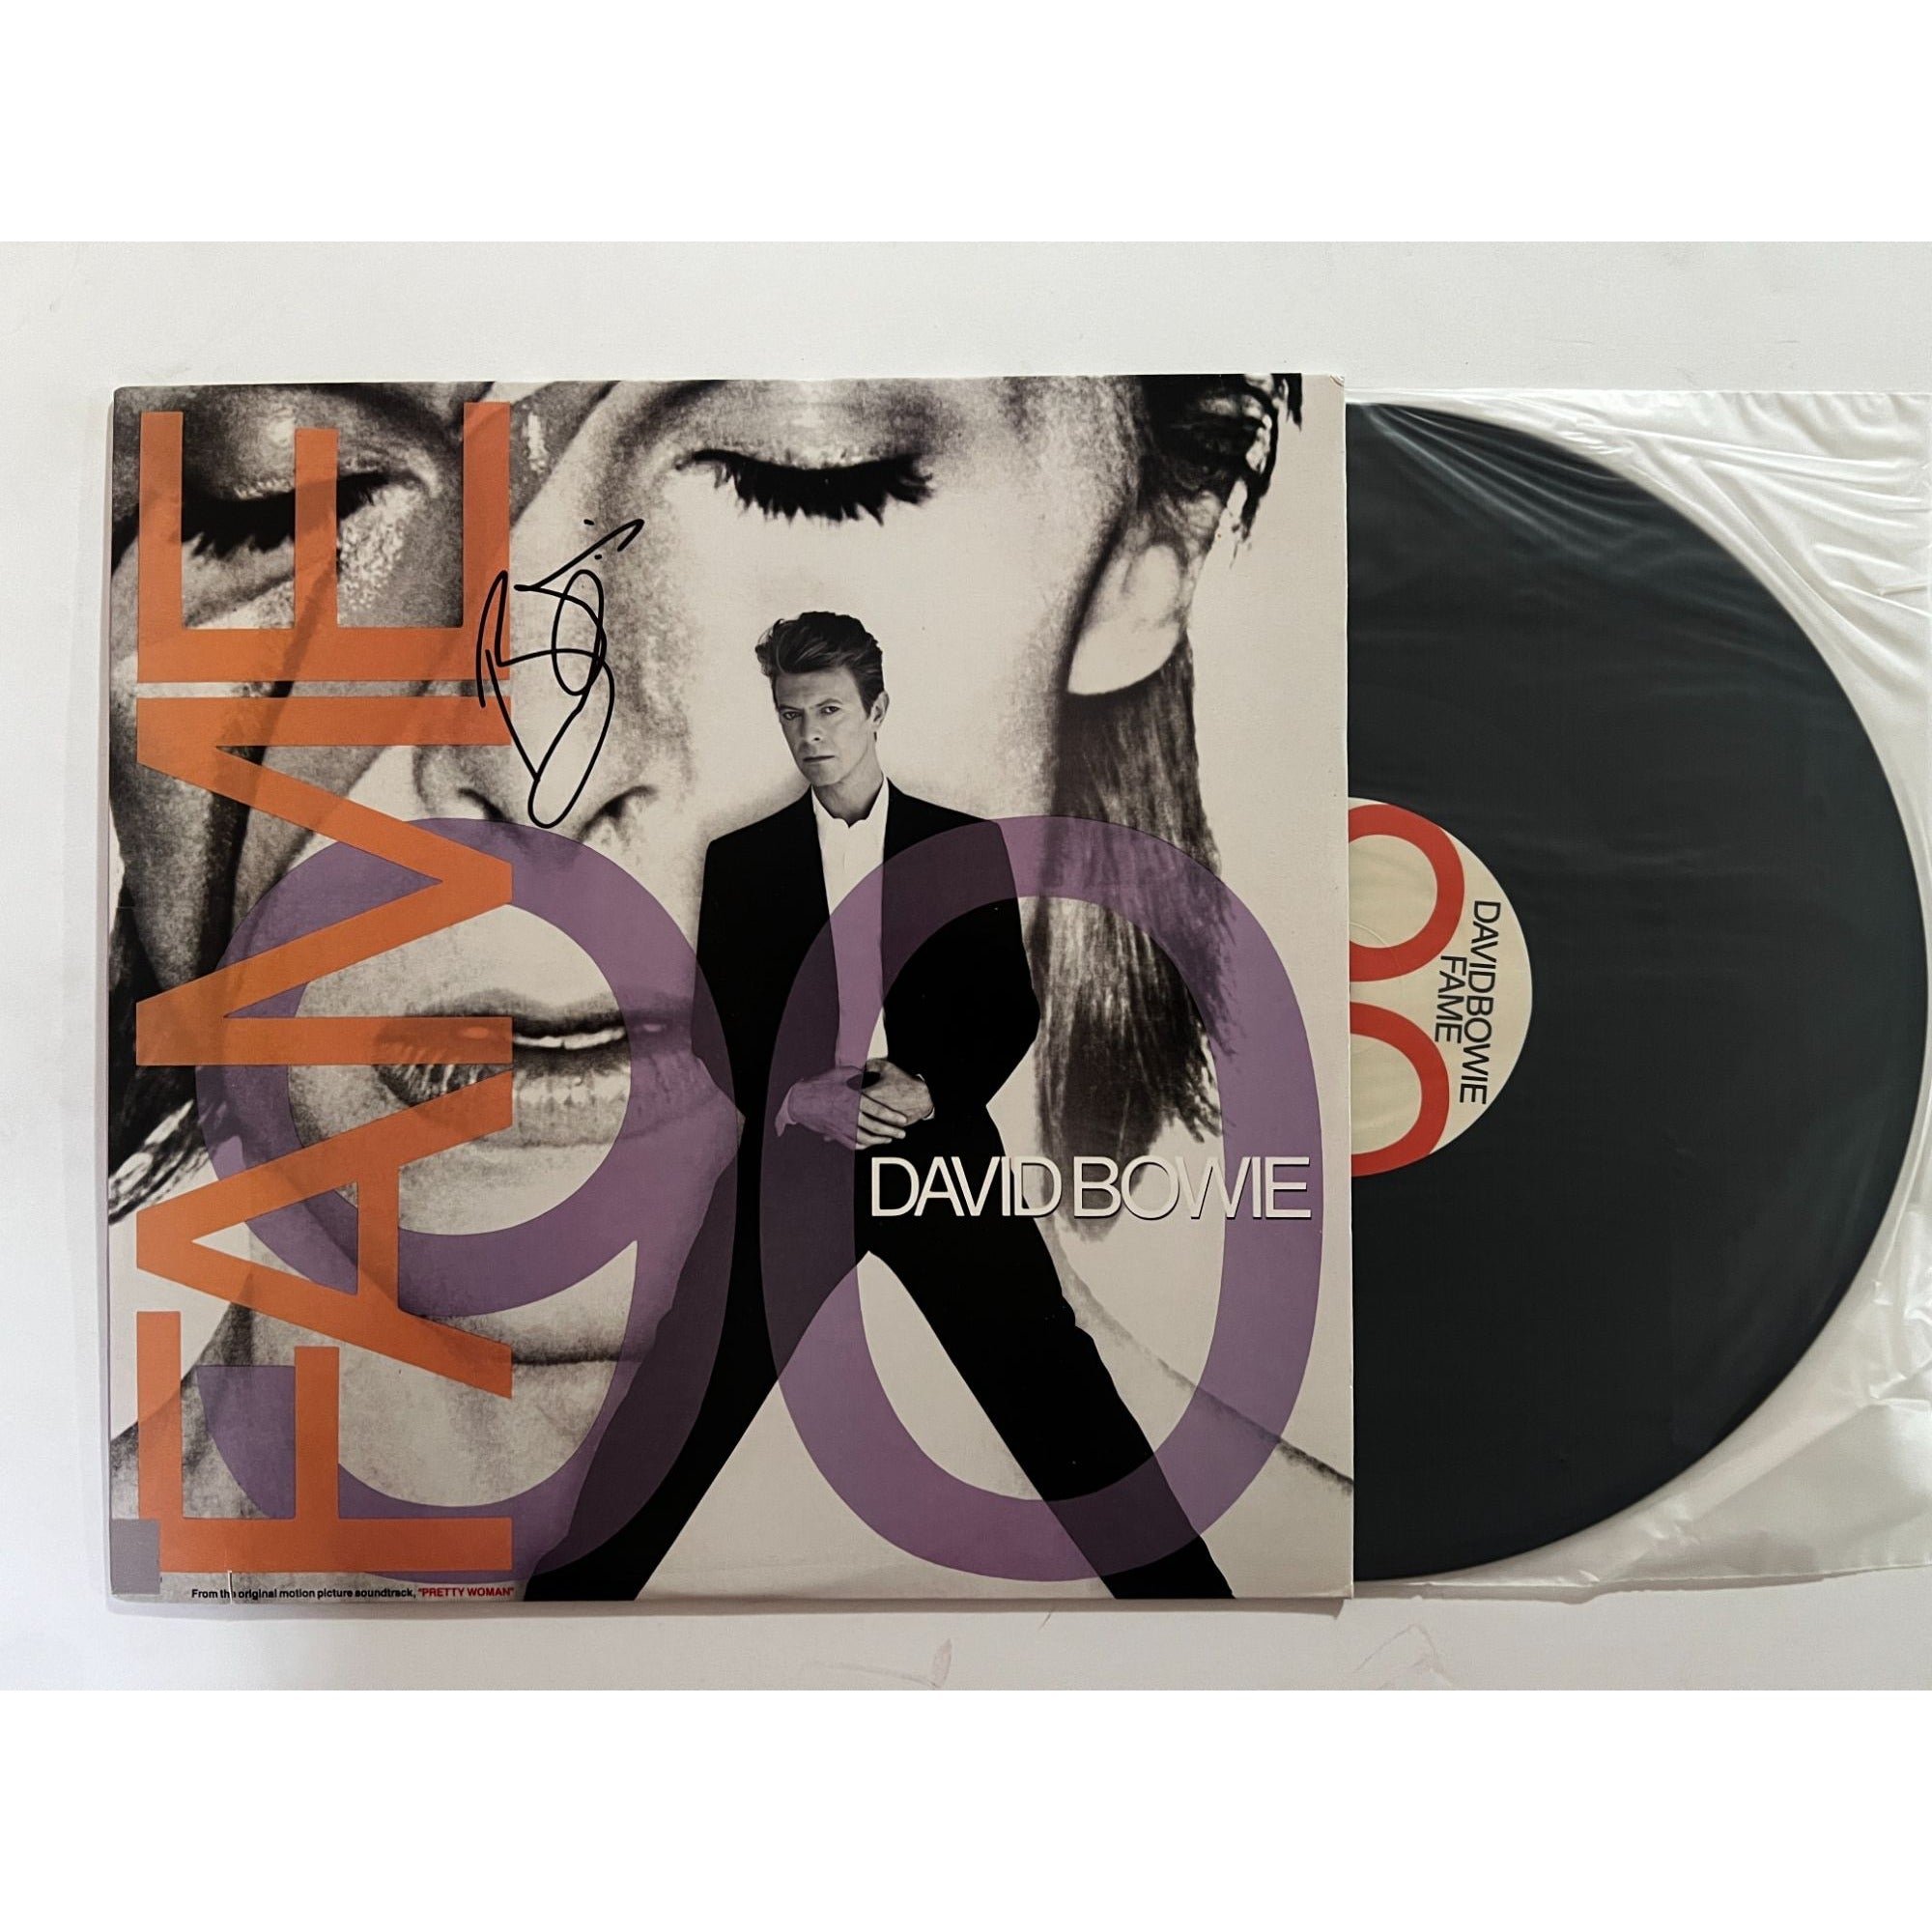 David Bowie "Fame" original LP signed with proof